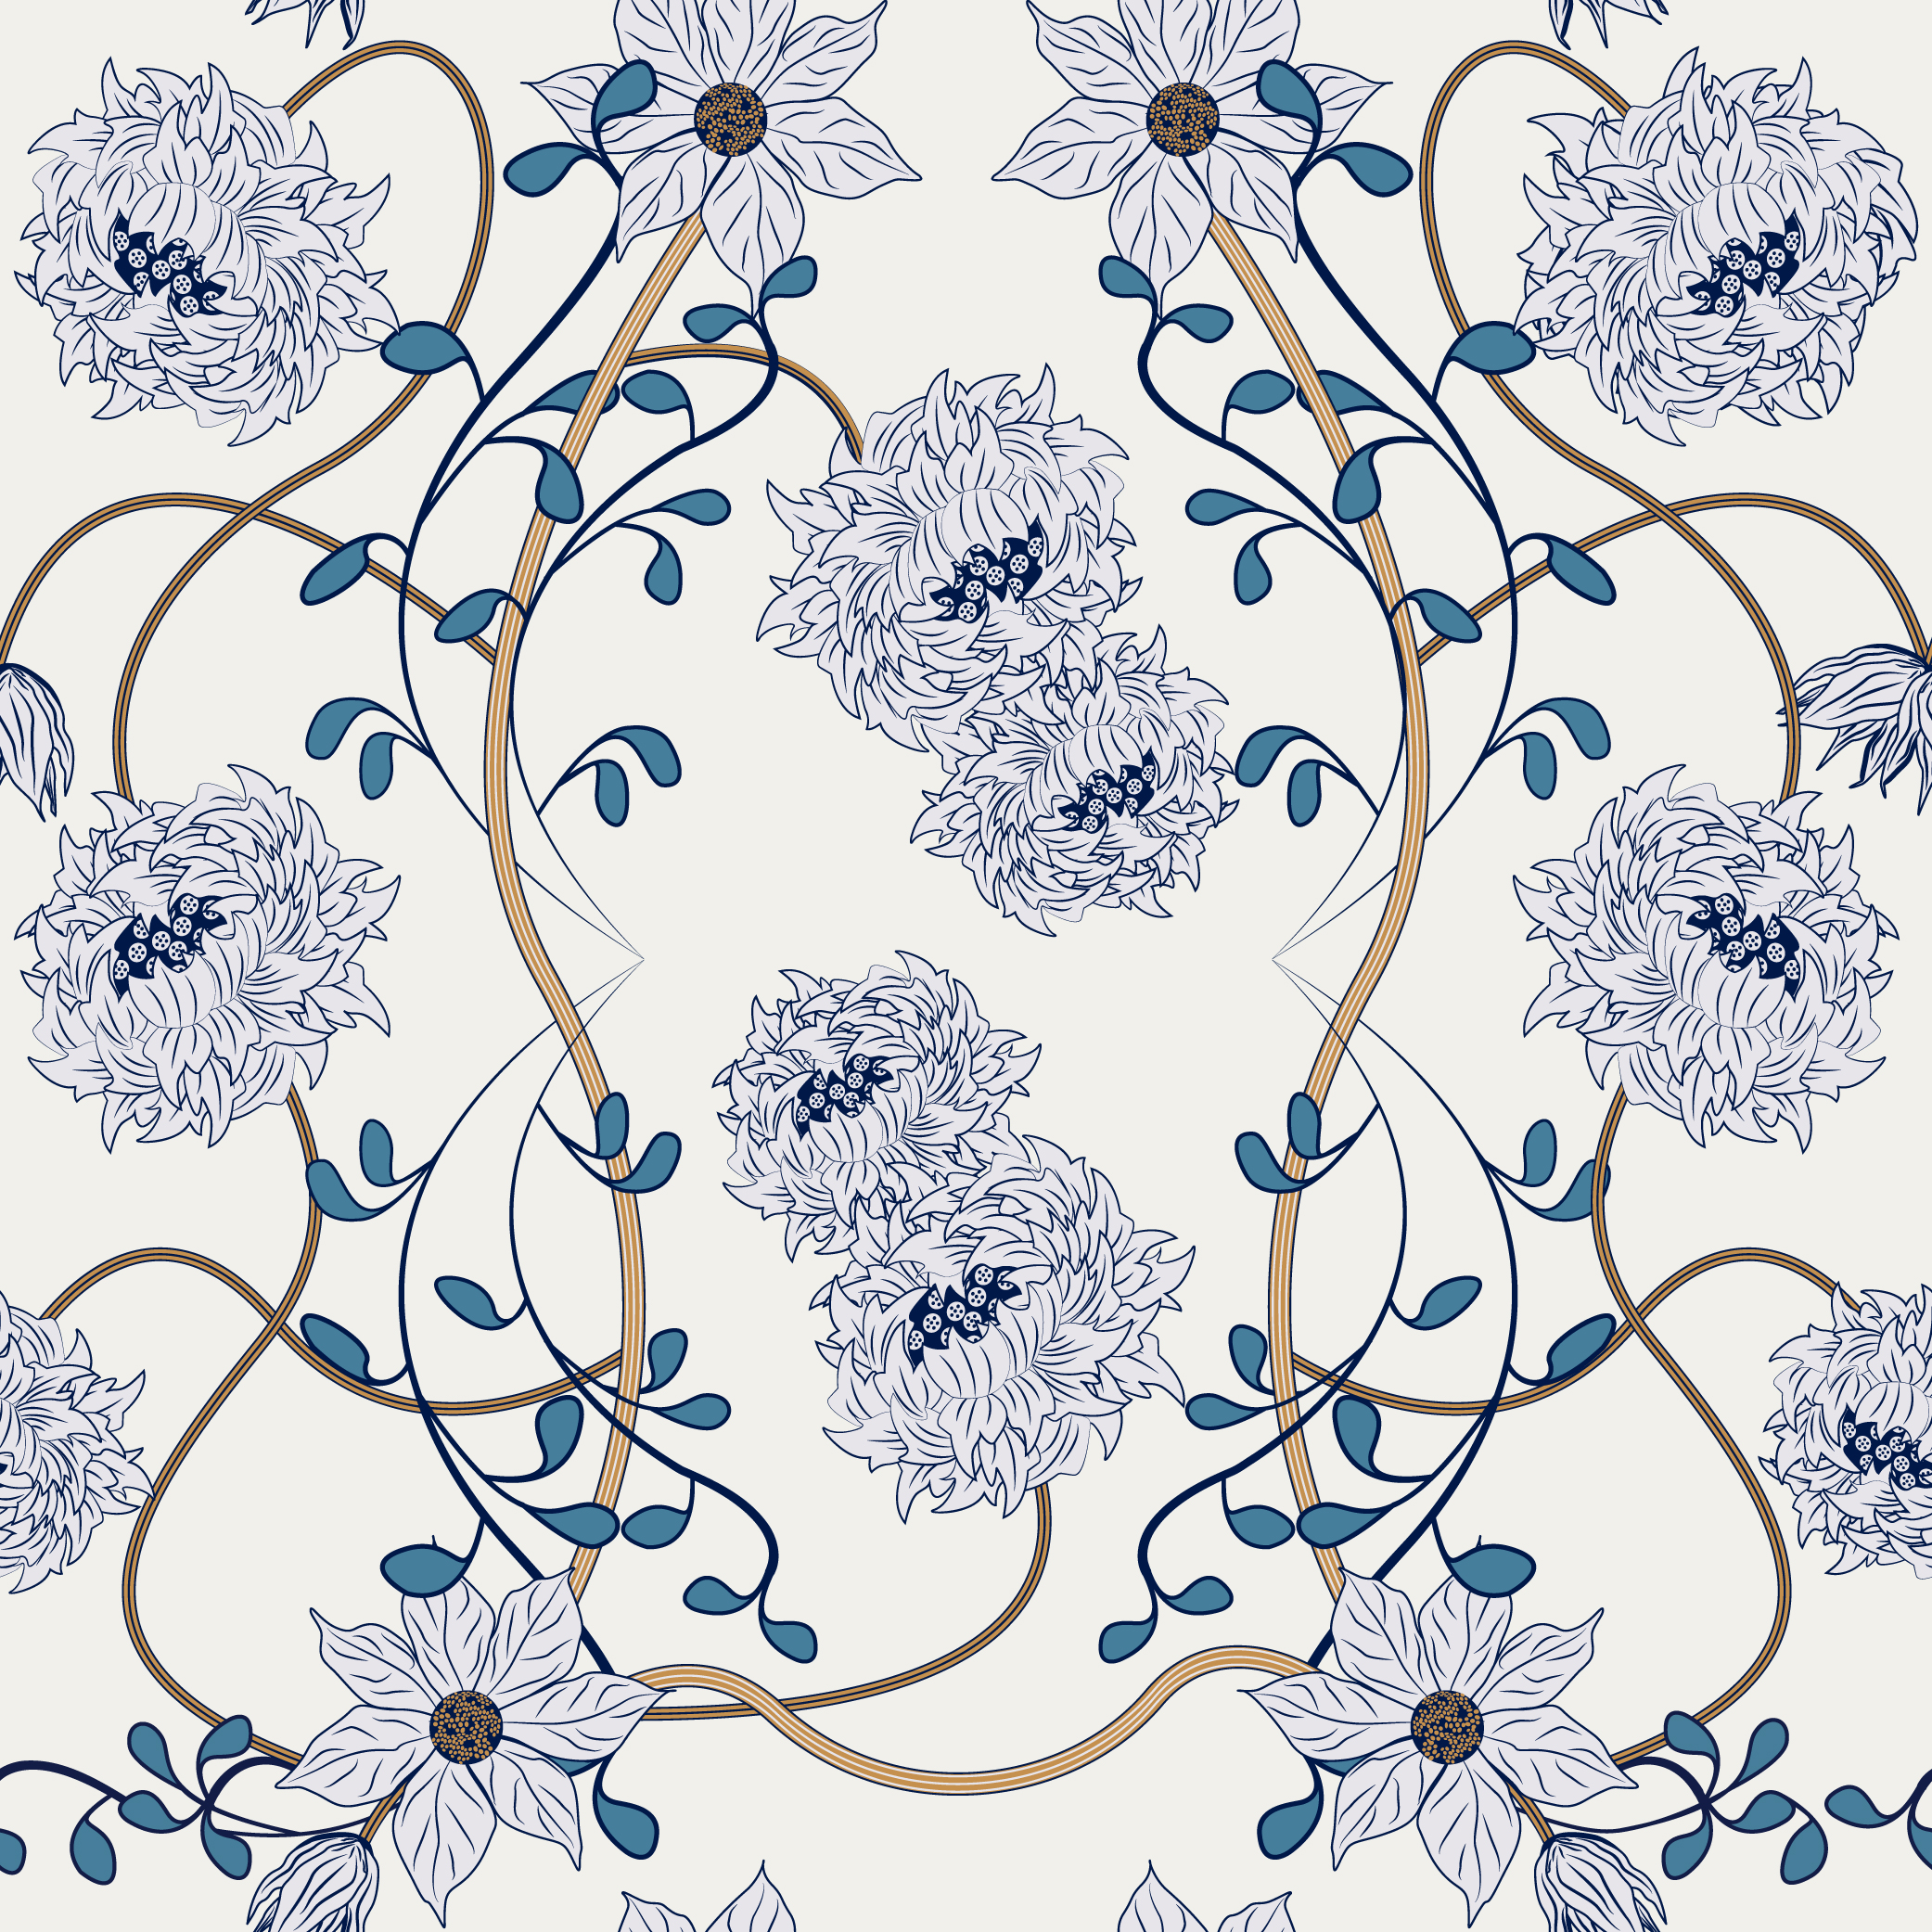 blue hues duvet covers stylised flowers curtains off white background chinoiserie timeless design.